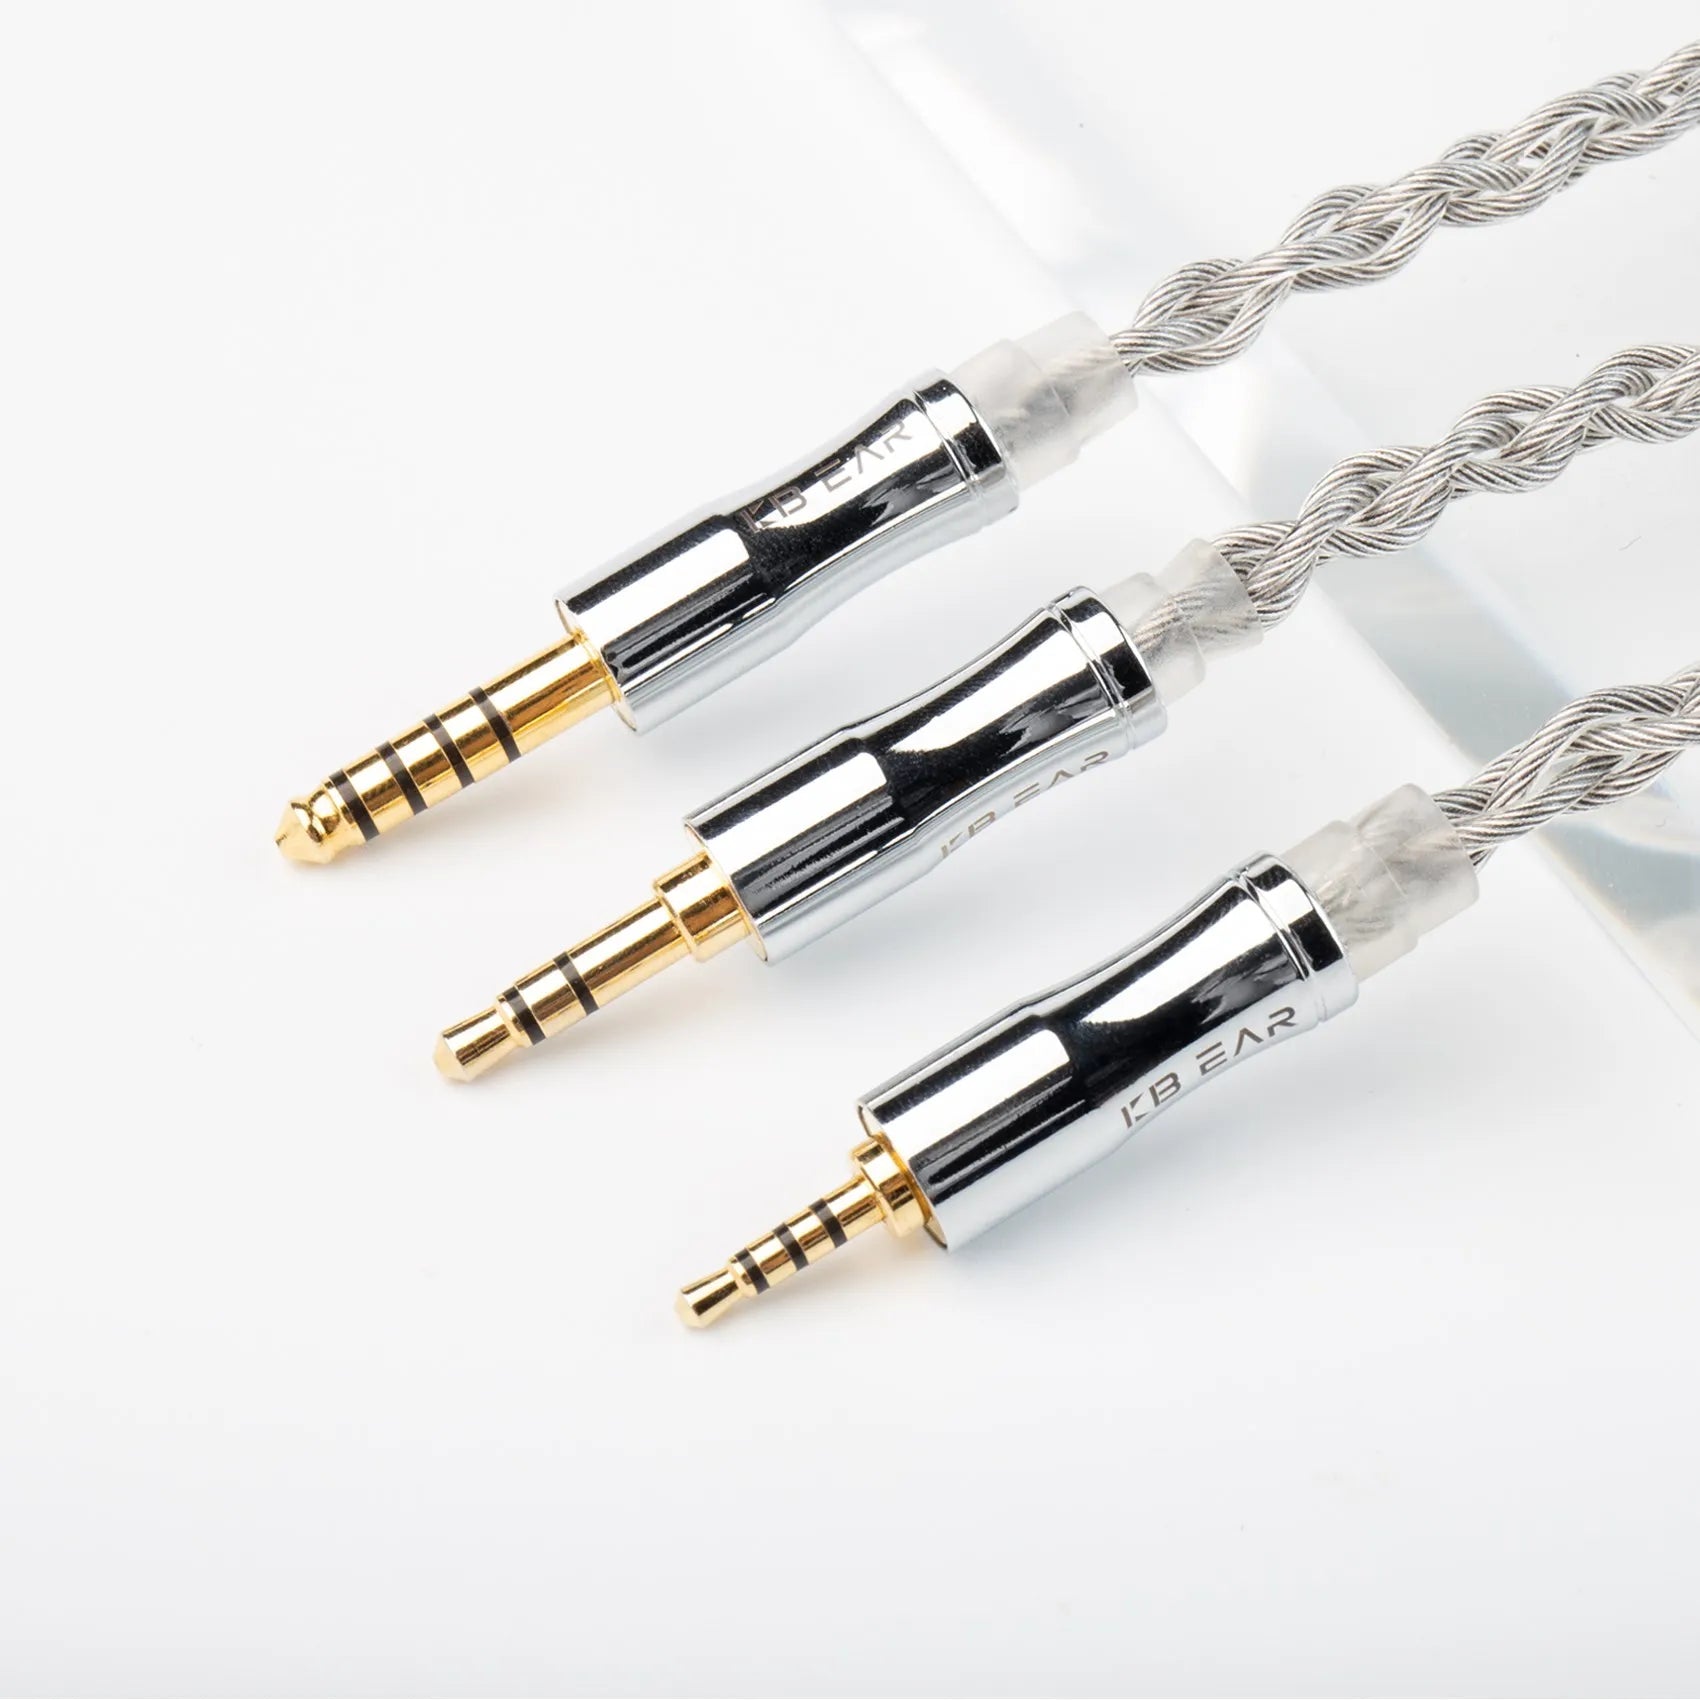 KBEAR Chord 6N Graphene+4N OFC Silver-plated Mixedly Braided Upgrade Cable - The HiFi Cat